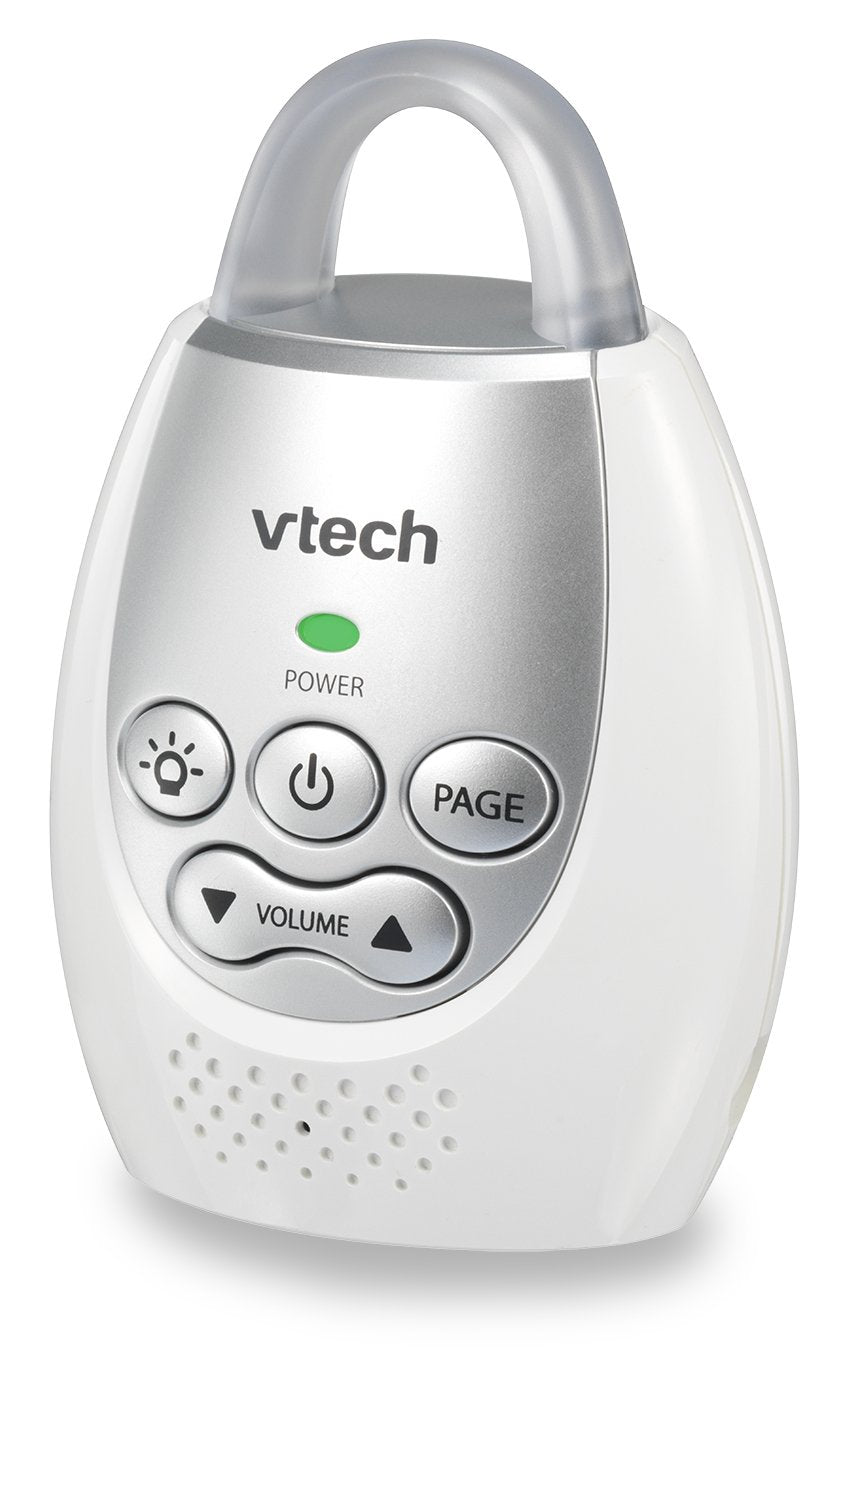 VTech DM221-2 Audio Baby Monitor, White - With two parents and up to 1,000 ft of Range